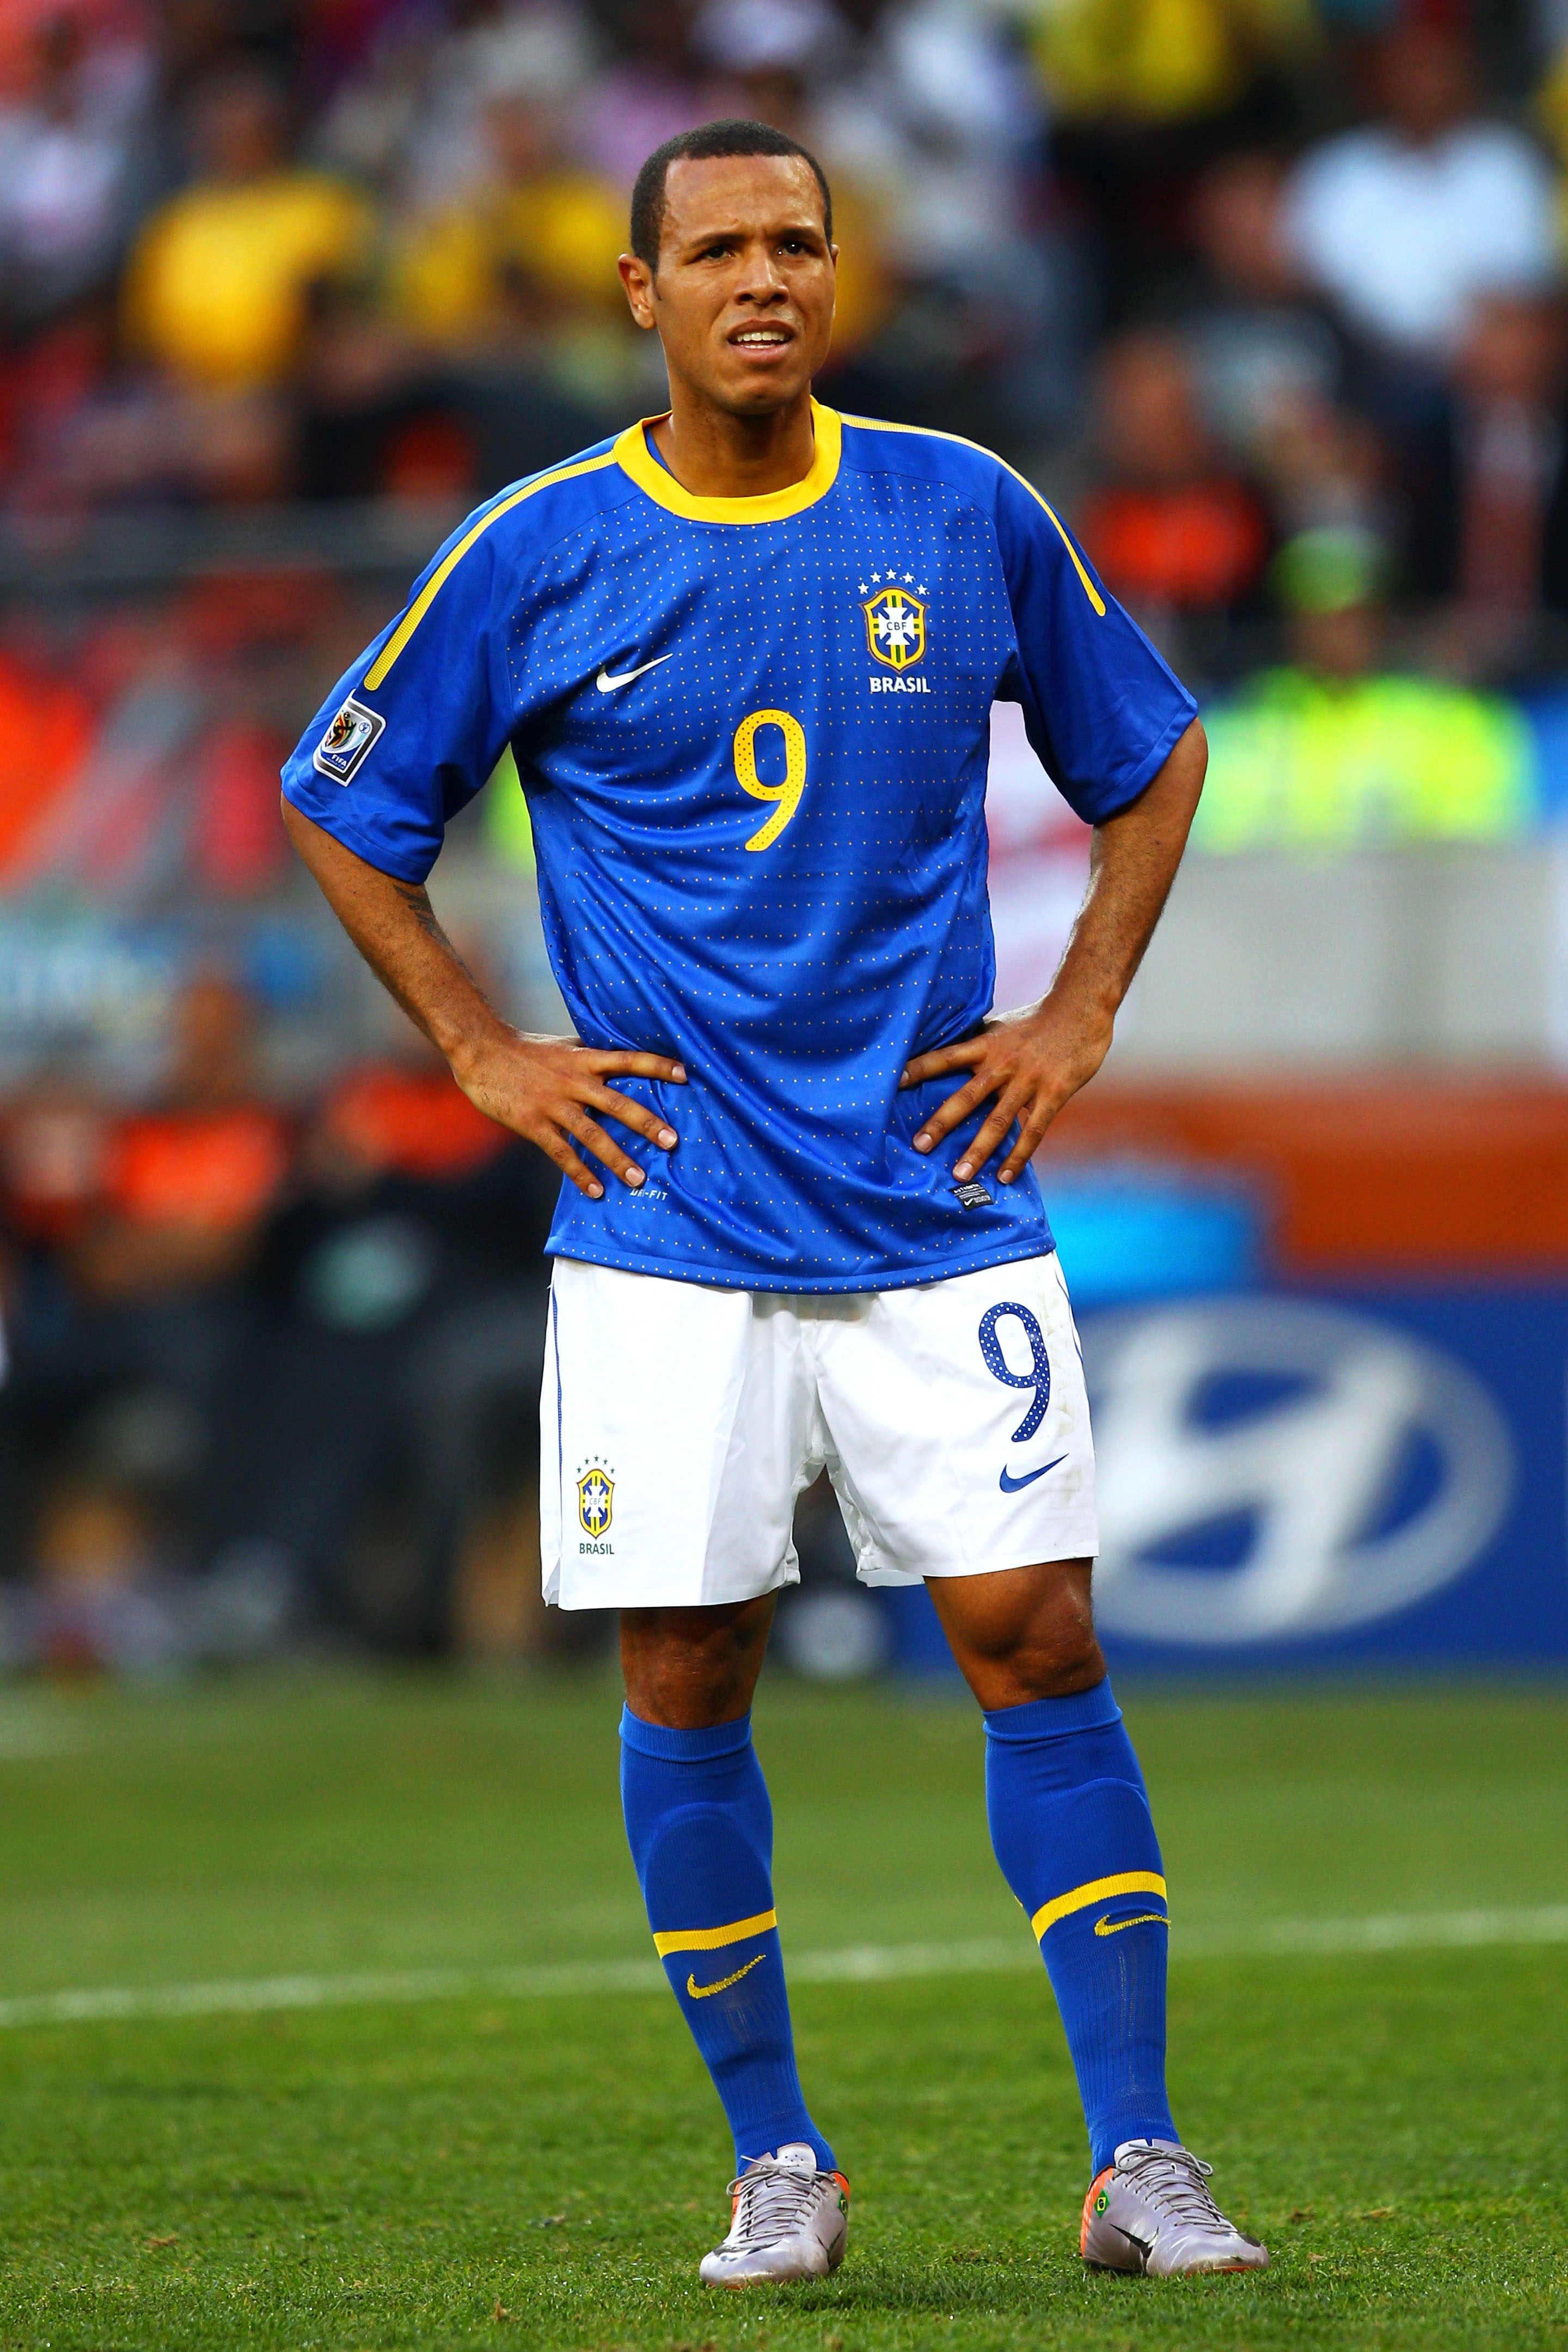 PORT ELIZABETH, SOUTH AFRICA - JULY 02:  Luis Fabiano of Brazil looks on during the 2010 FIFA World Cup South Africa Quarter Final match between Netherlands and Brazil at Nelson Mandela Bay Stadium on July 2, 2010 in Nelson Mandela Bay/Port Elizabeth, Sou